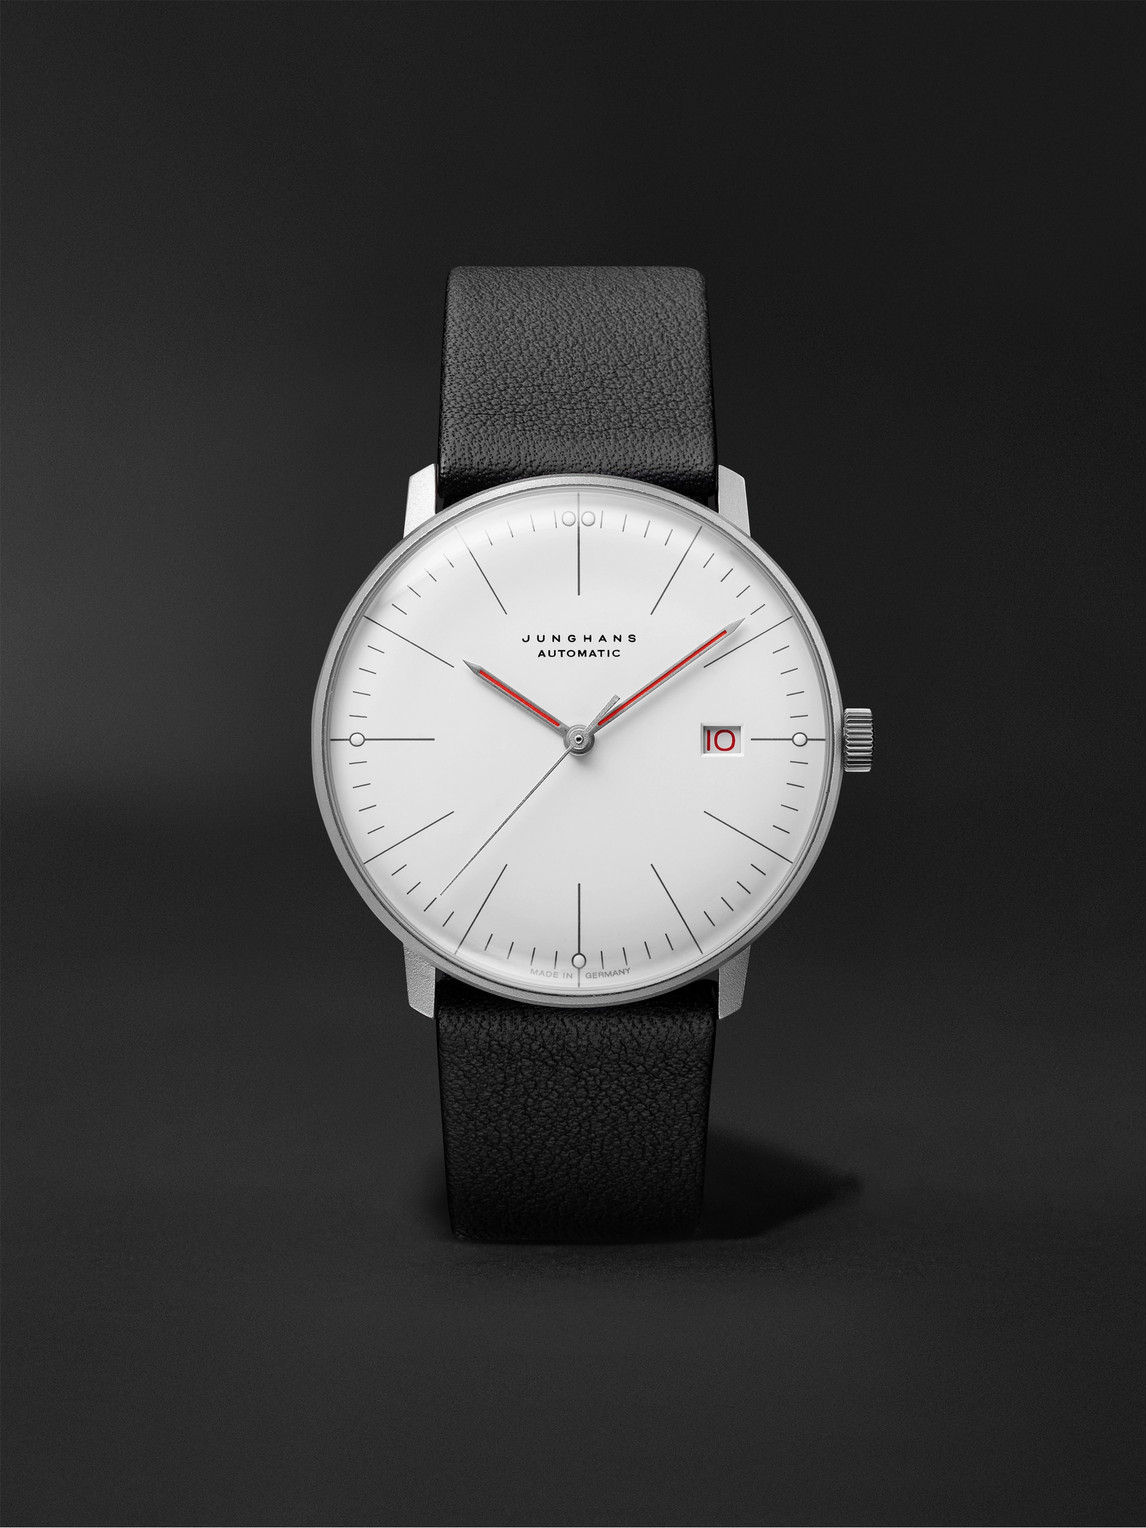 Junghans Max Bill Bauhaus Automatic 38mm Stainless Steel And Textured-leather Watch, Ref. No. 027/4009.02 In White